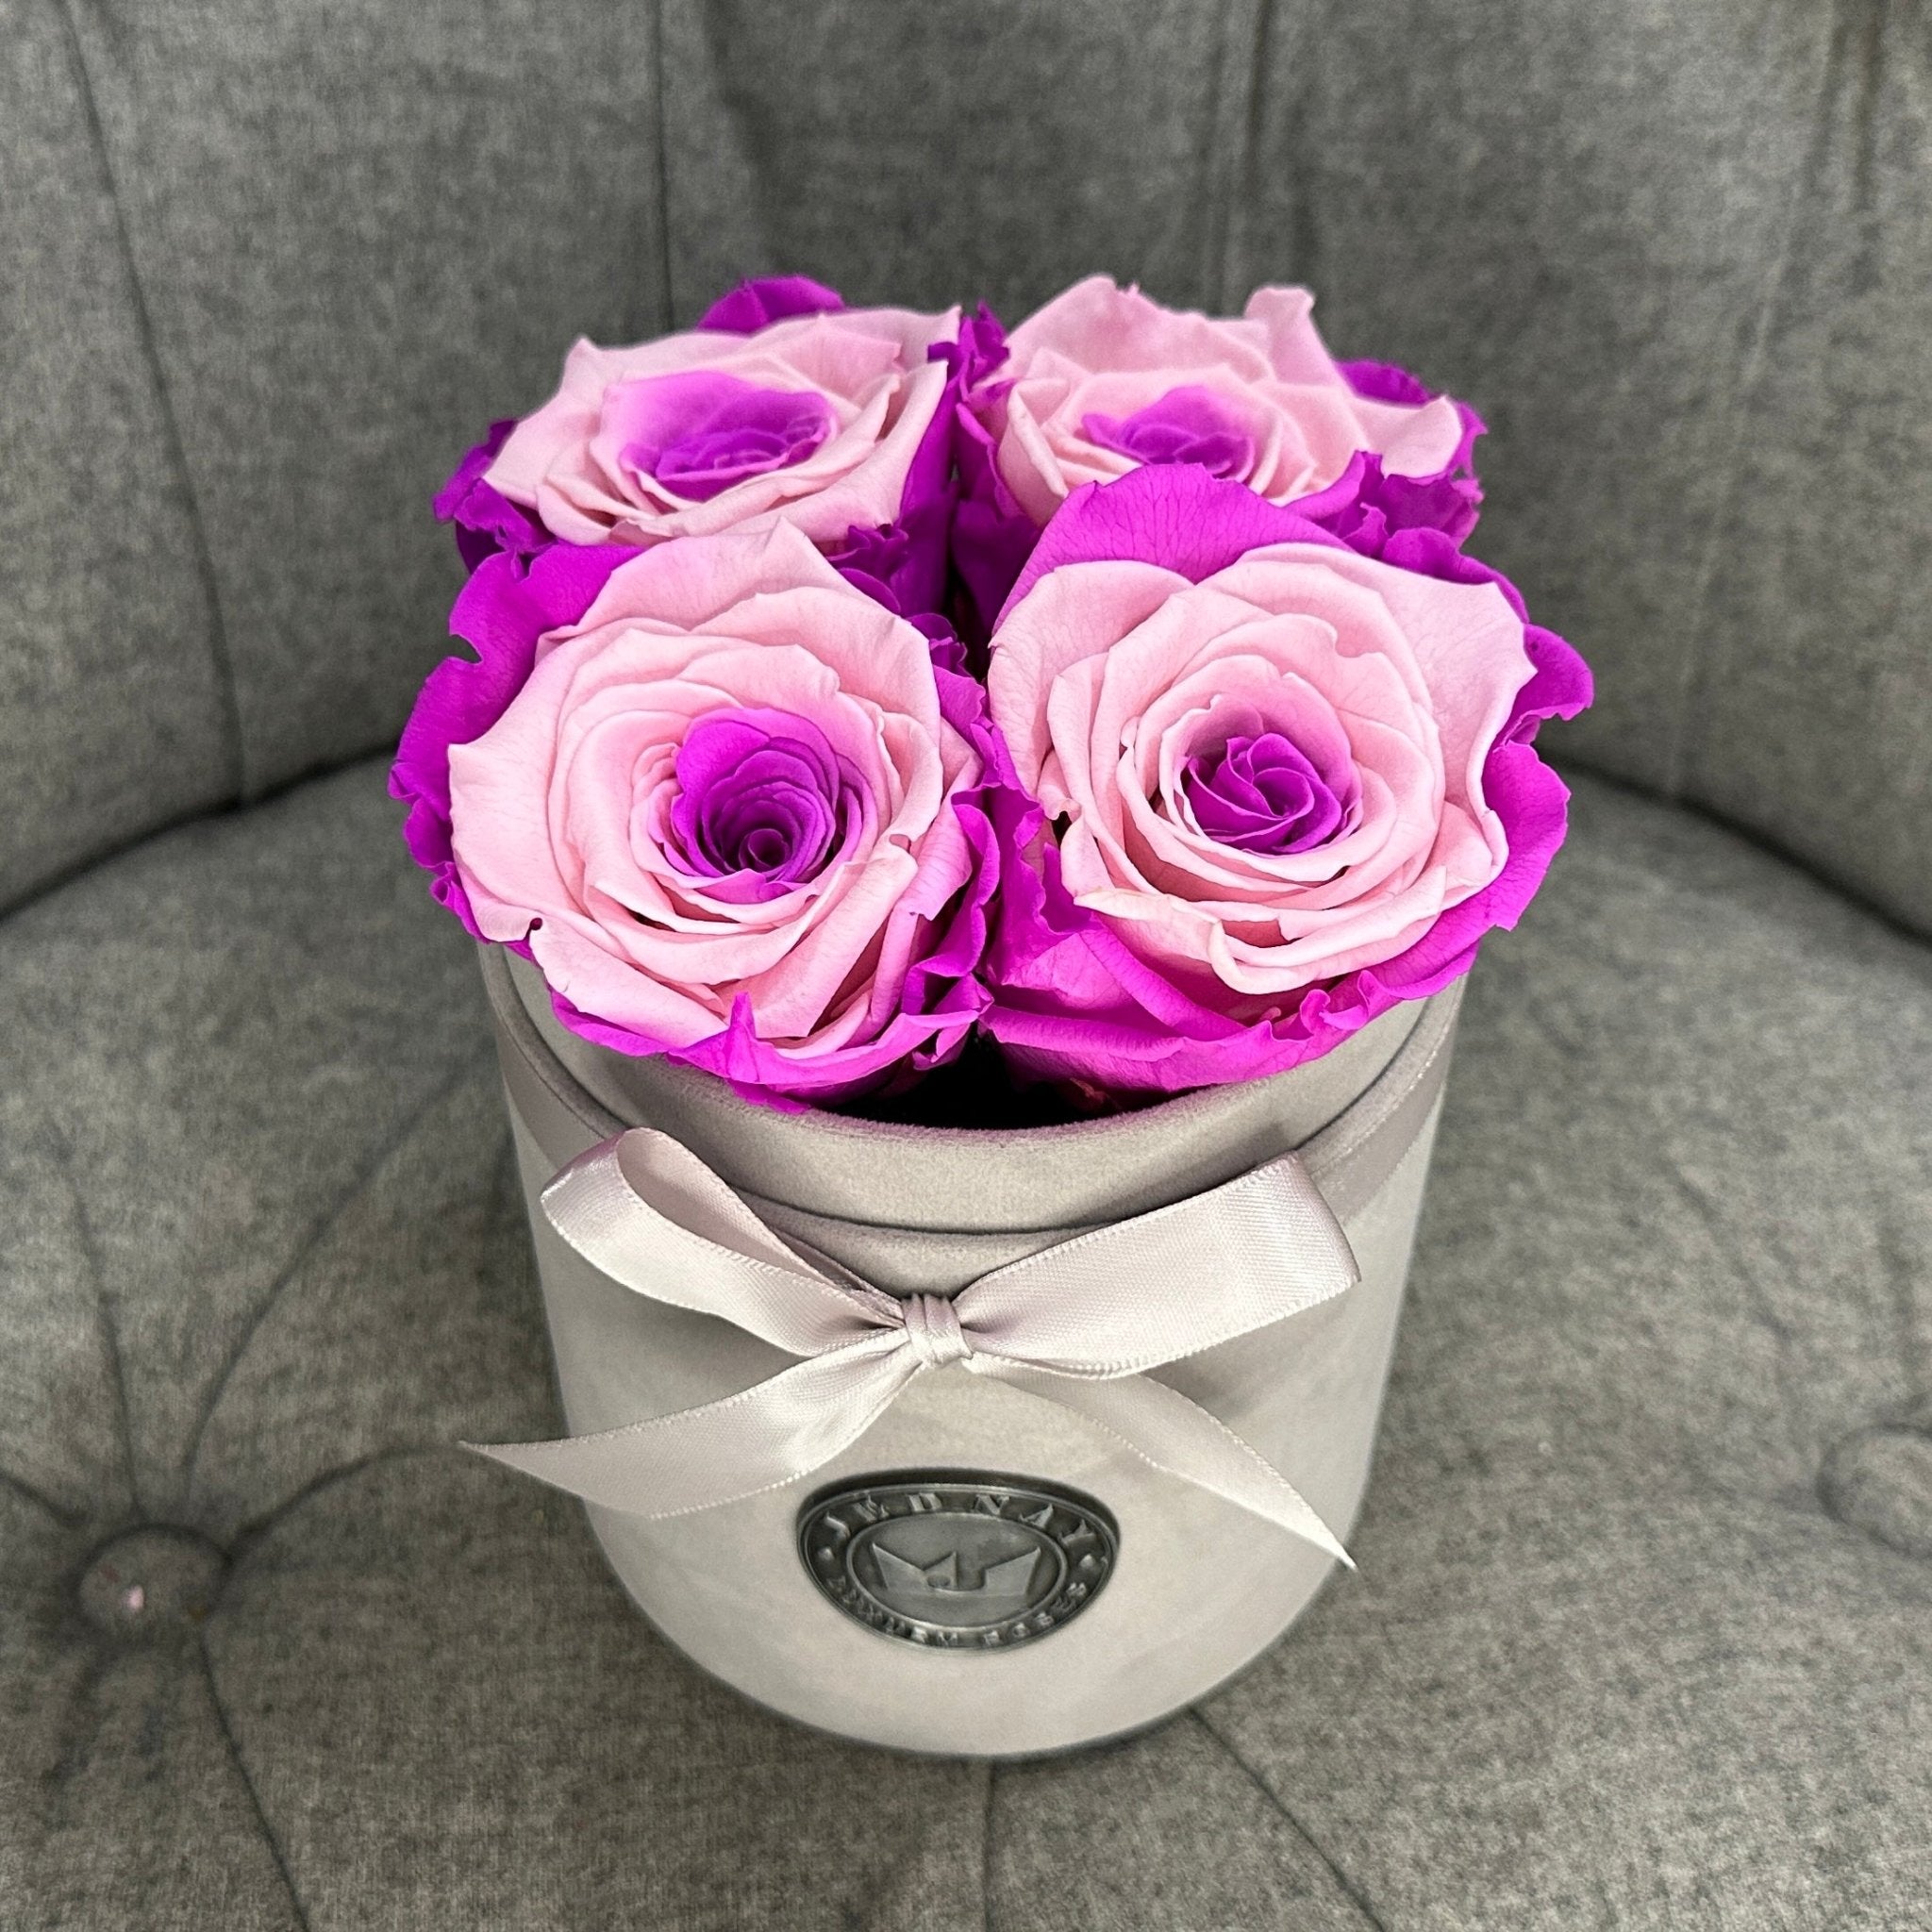 Petite Grey Suede Forever Rose Box - Candy Floss Eternal Roses - Jednay Roses